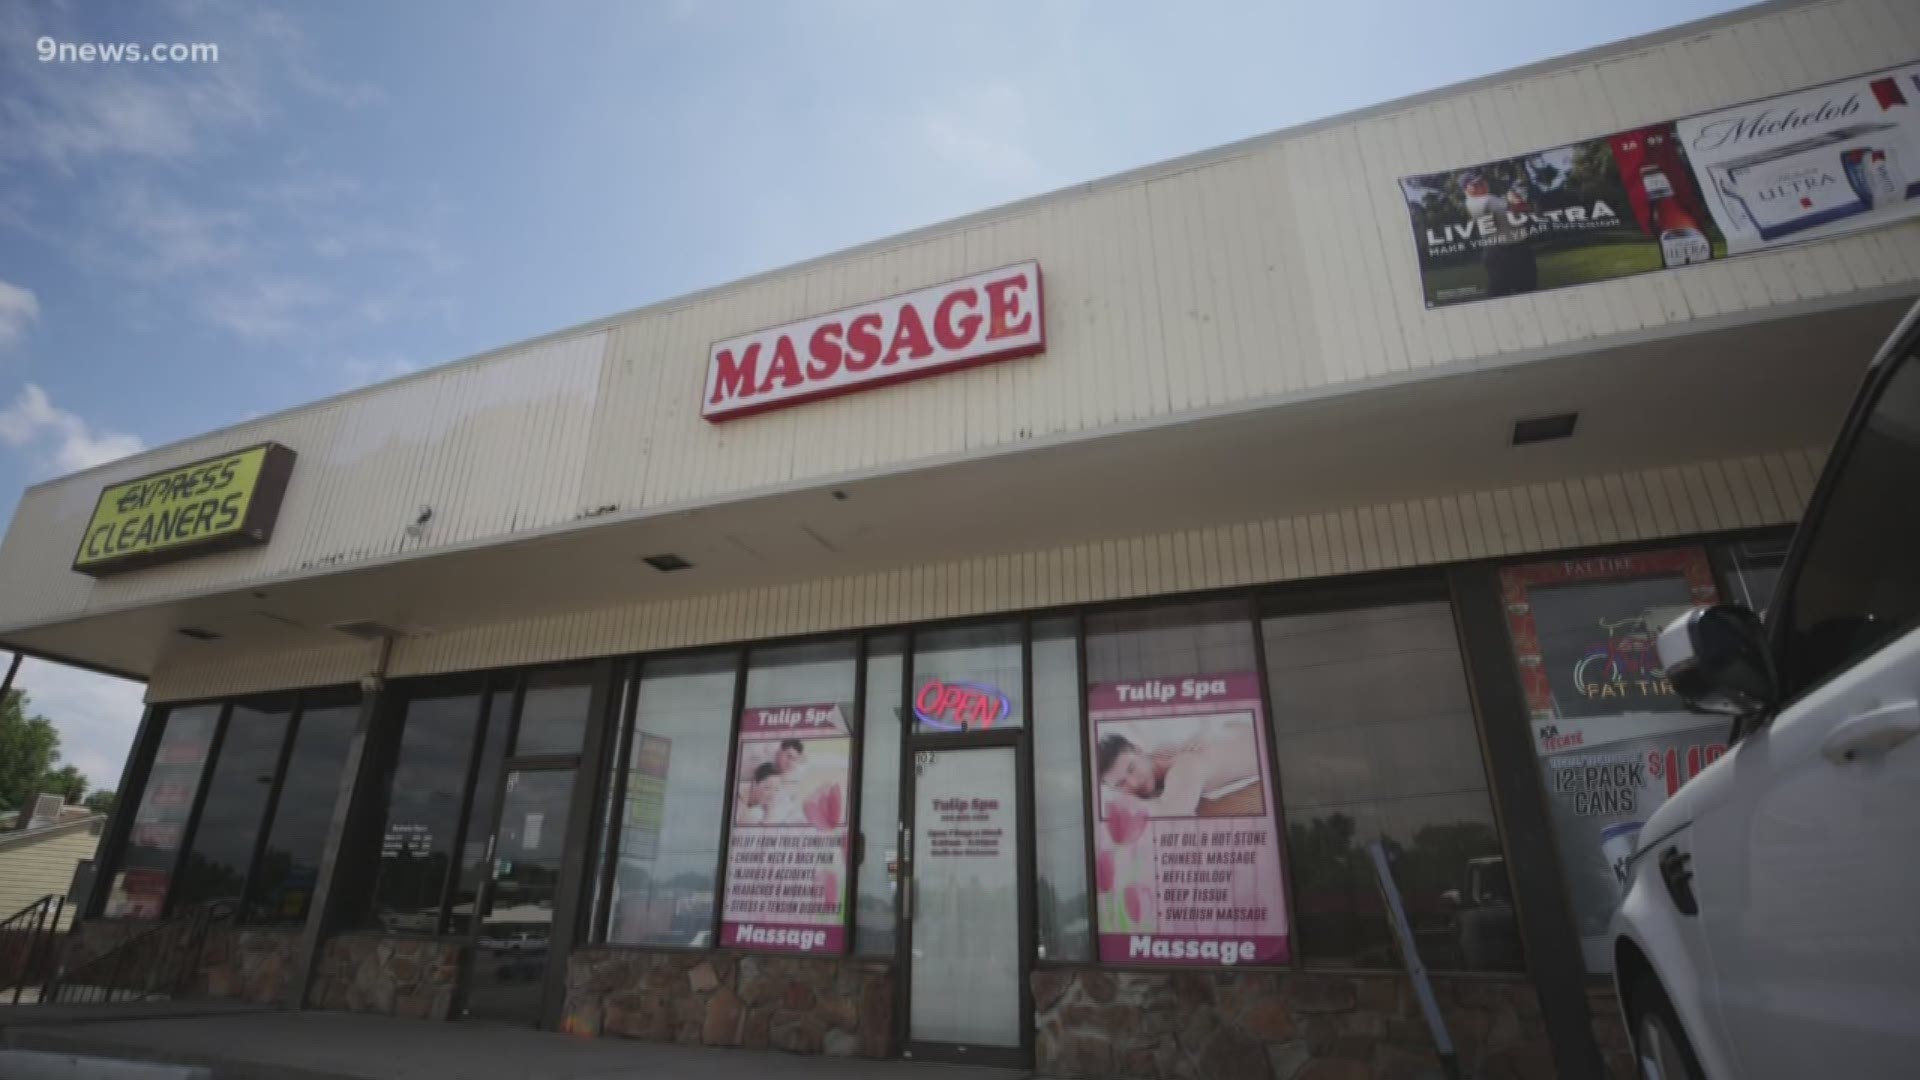 After an ordinance intended to wipe out illicit massage parlors in Aurora was passed, 9Wants to Know found they were able to easily reopen across city lines. This is part 1 of that investigation.